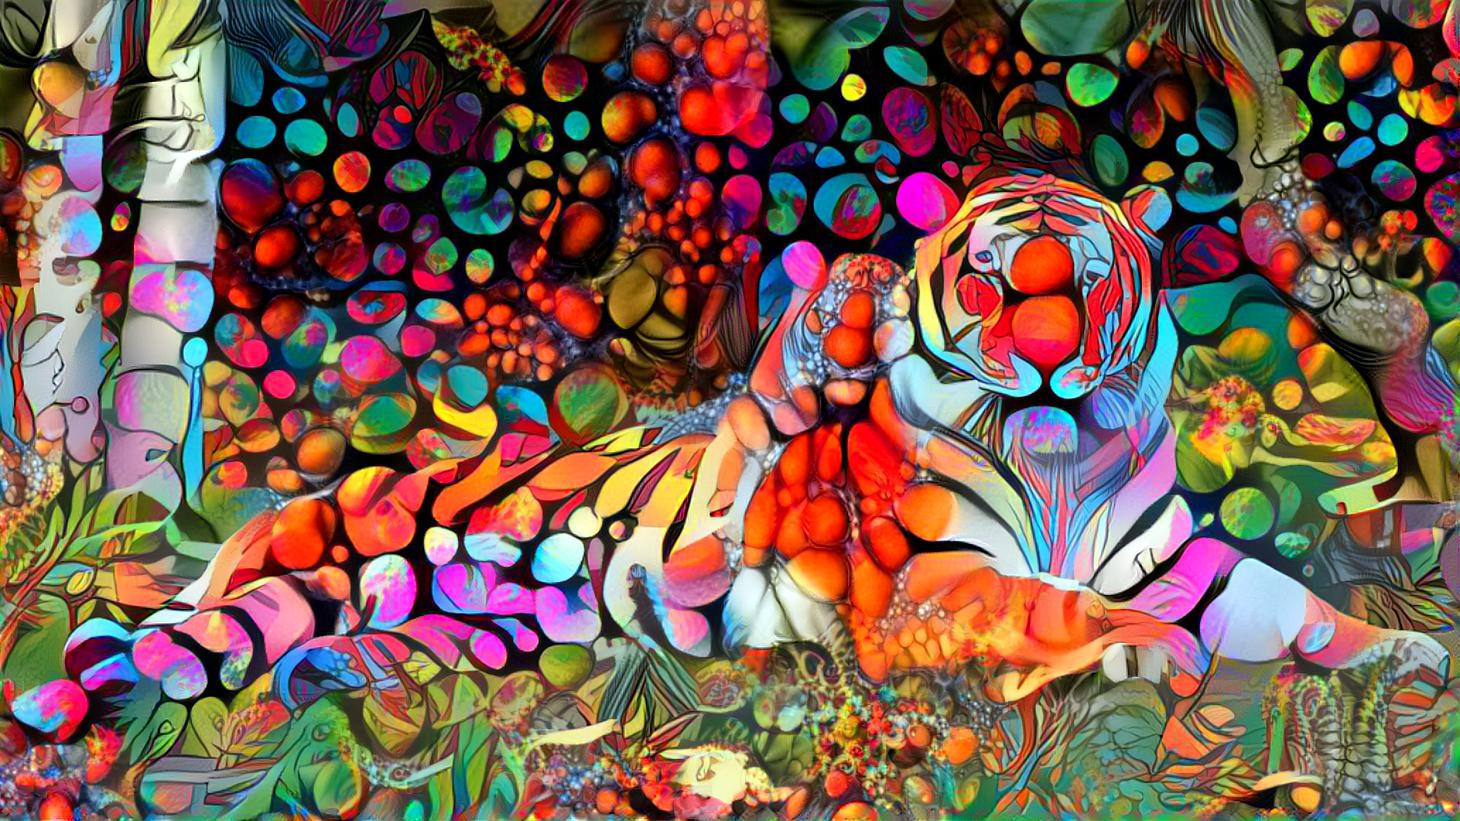 Tiger and son in a magical world